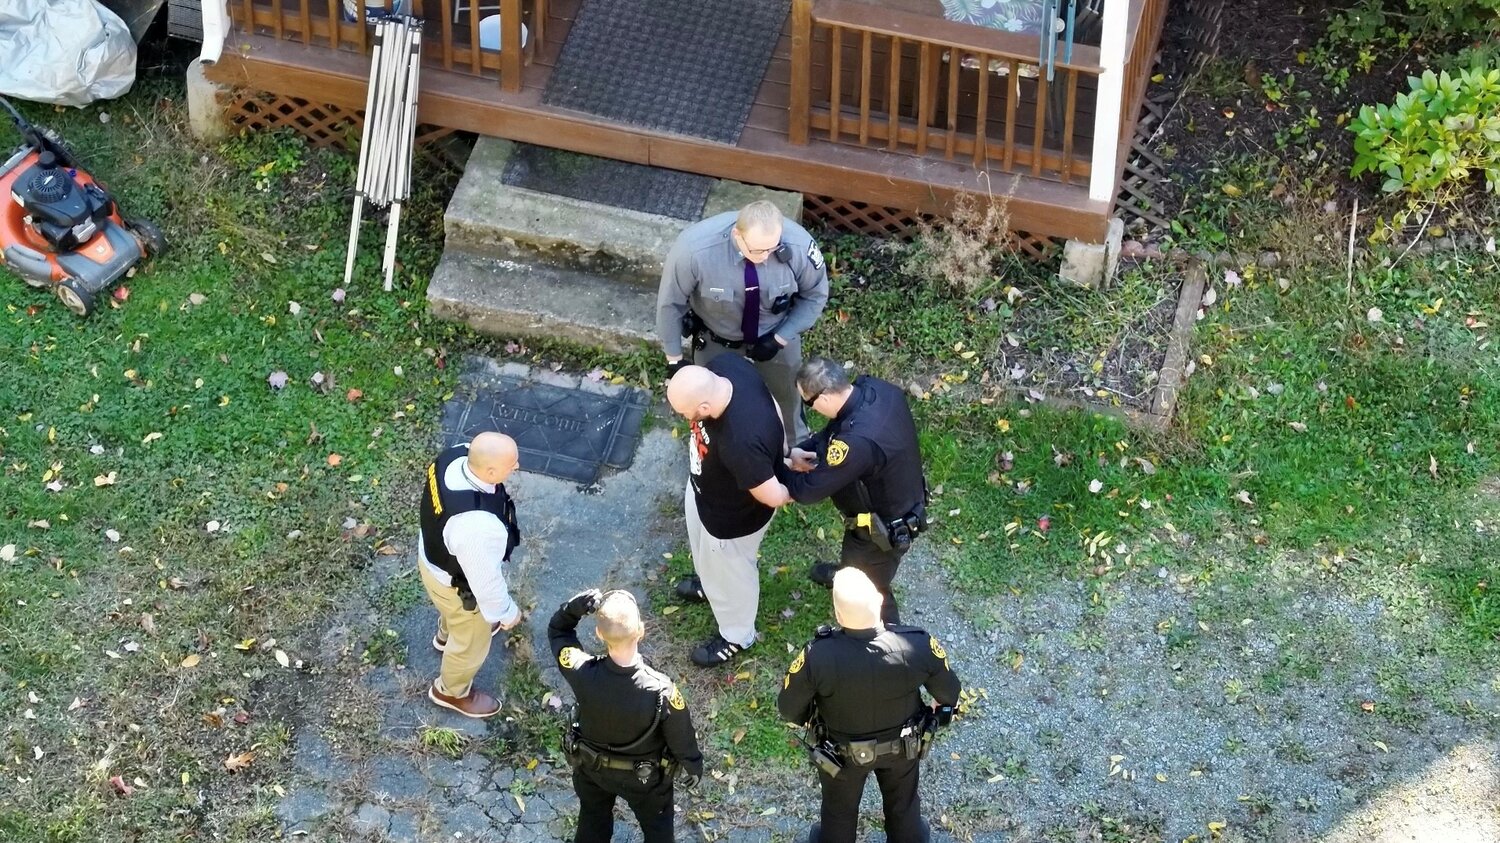 Suspect Joseph Bell, center, is taken into custody outside of his residence without incident.